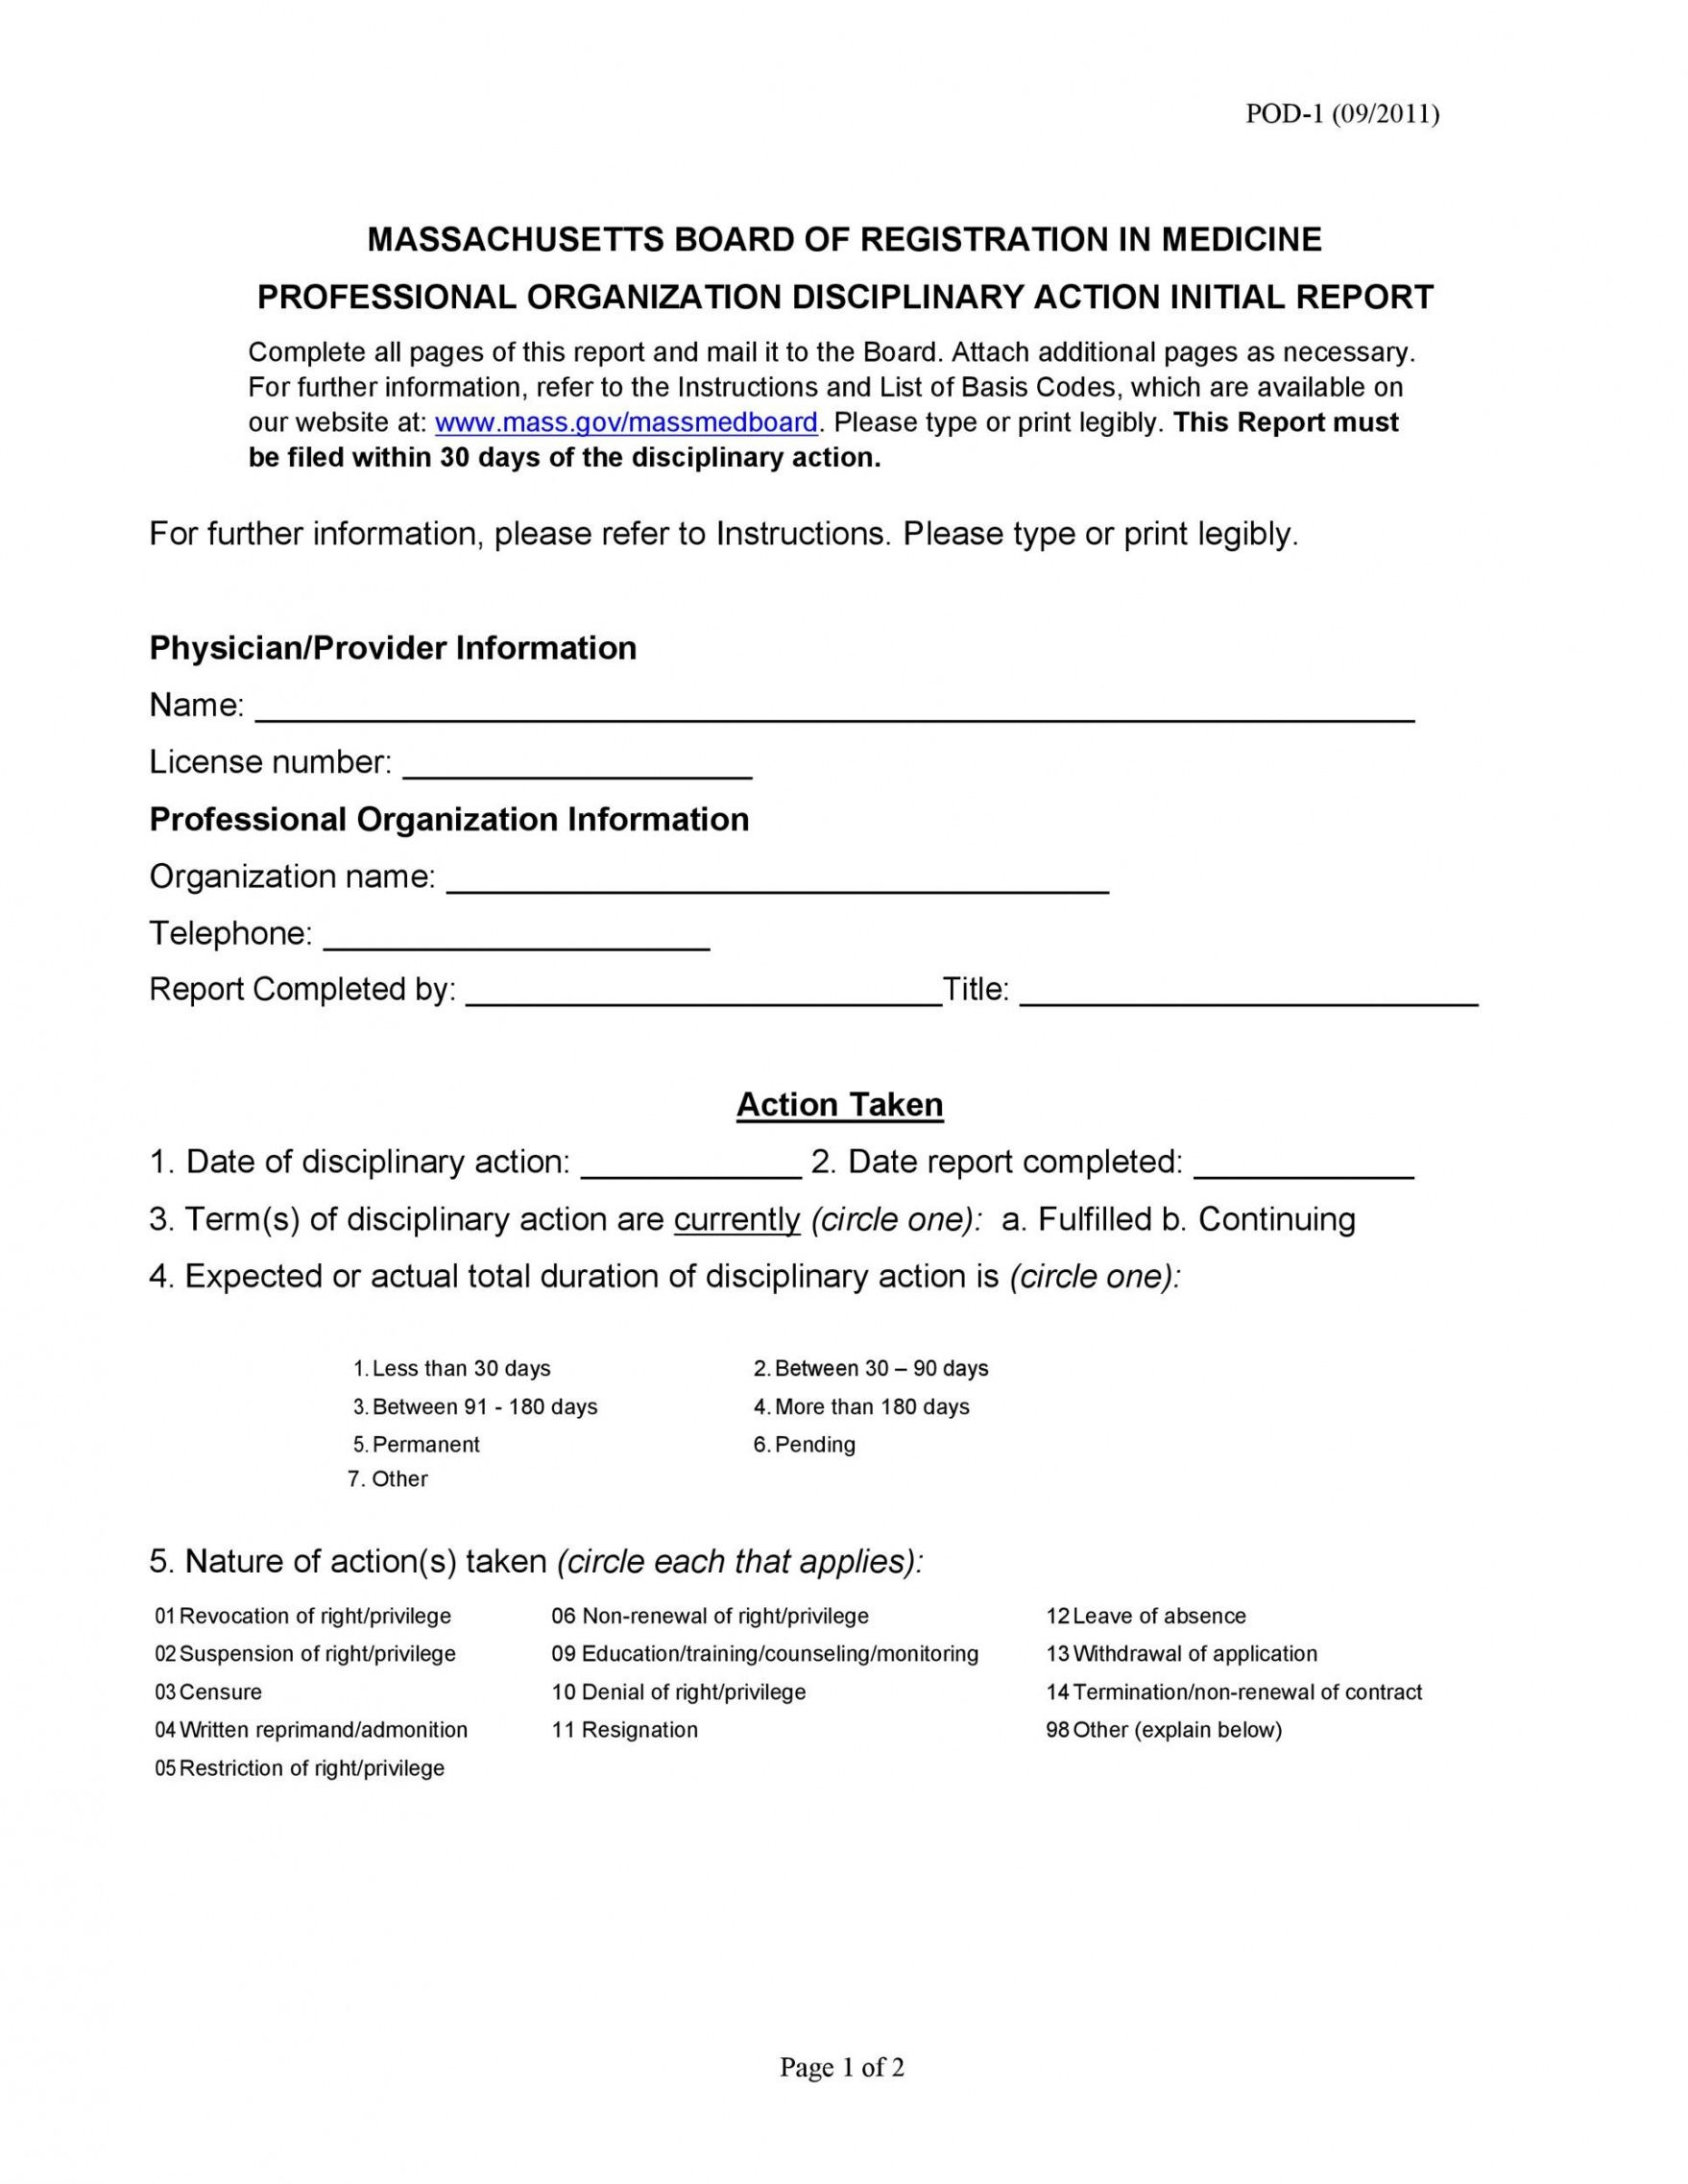 Costum Disciplinary Action Form Template  Sample